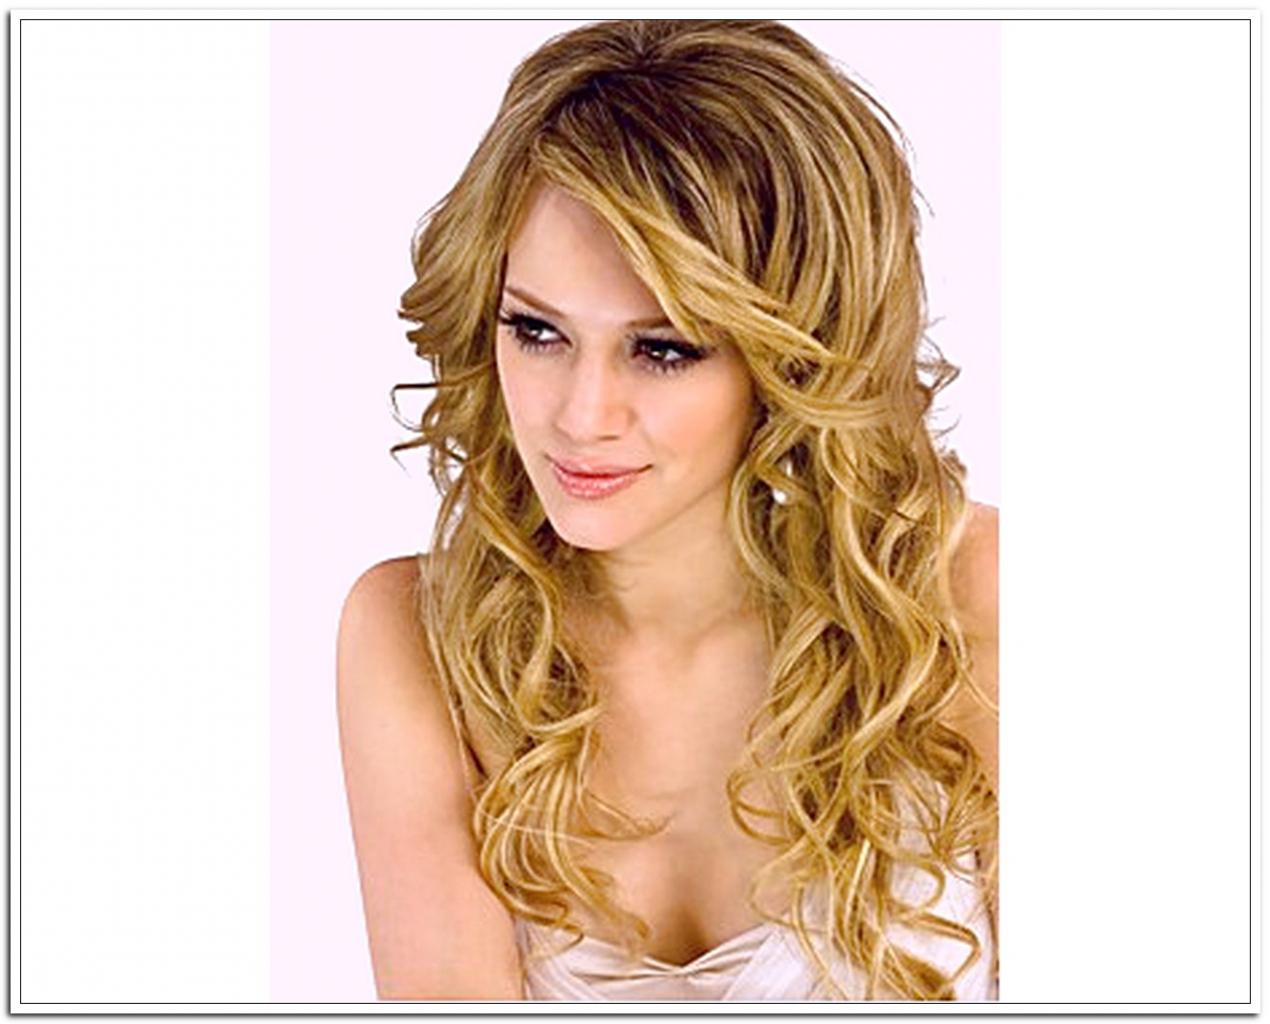 Cute Hairstyles For Long Hair For Homecomingp HD Wallpaper